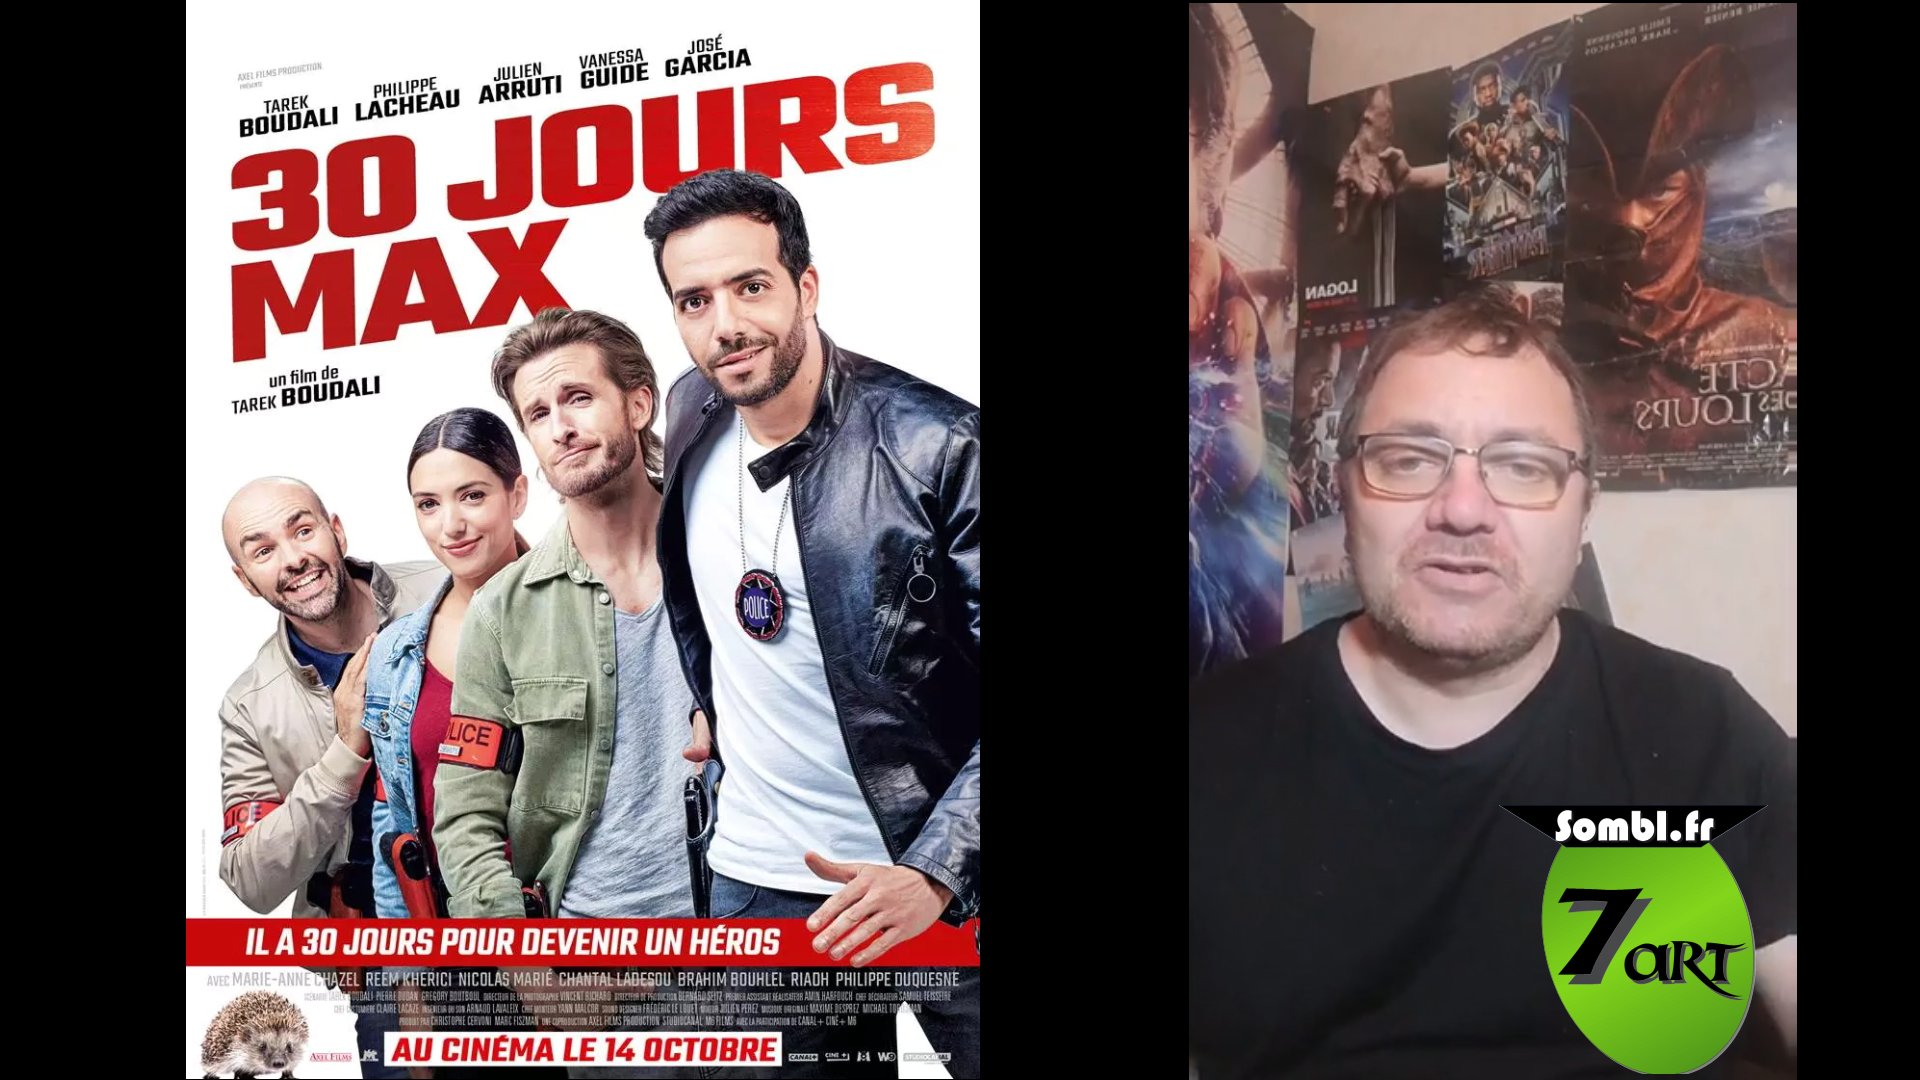 7Art Review – 30 jours Max